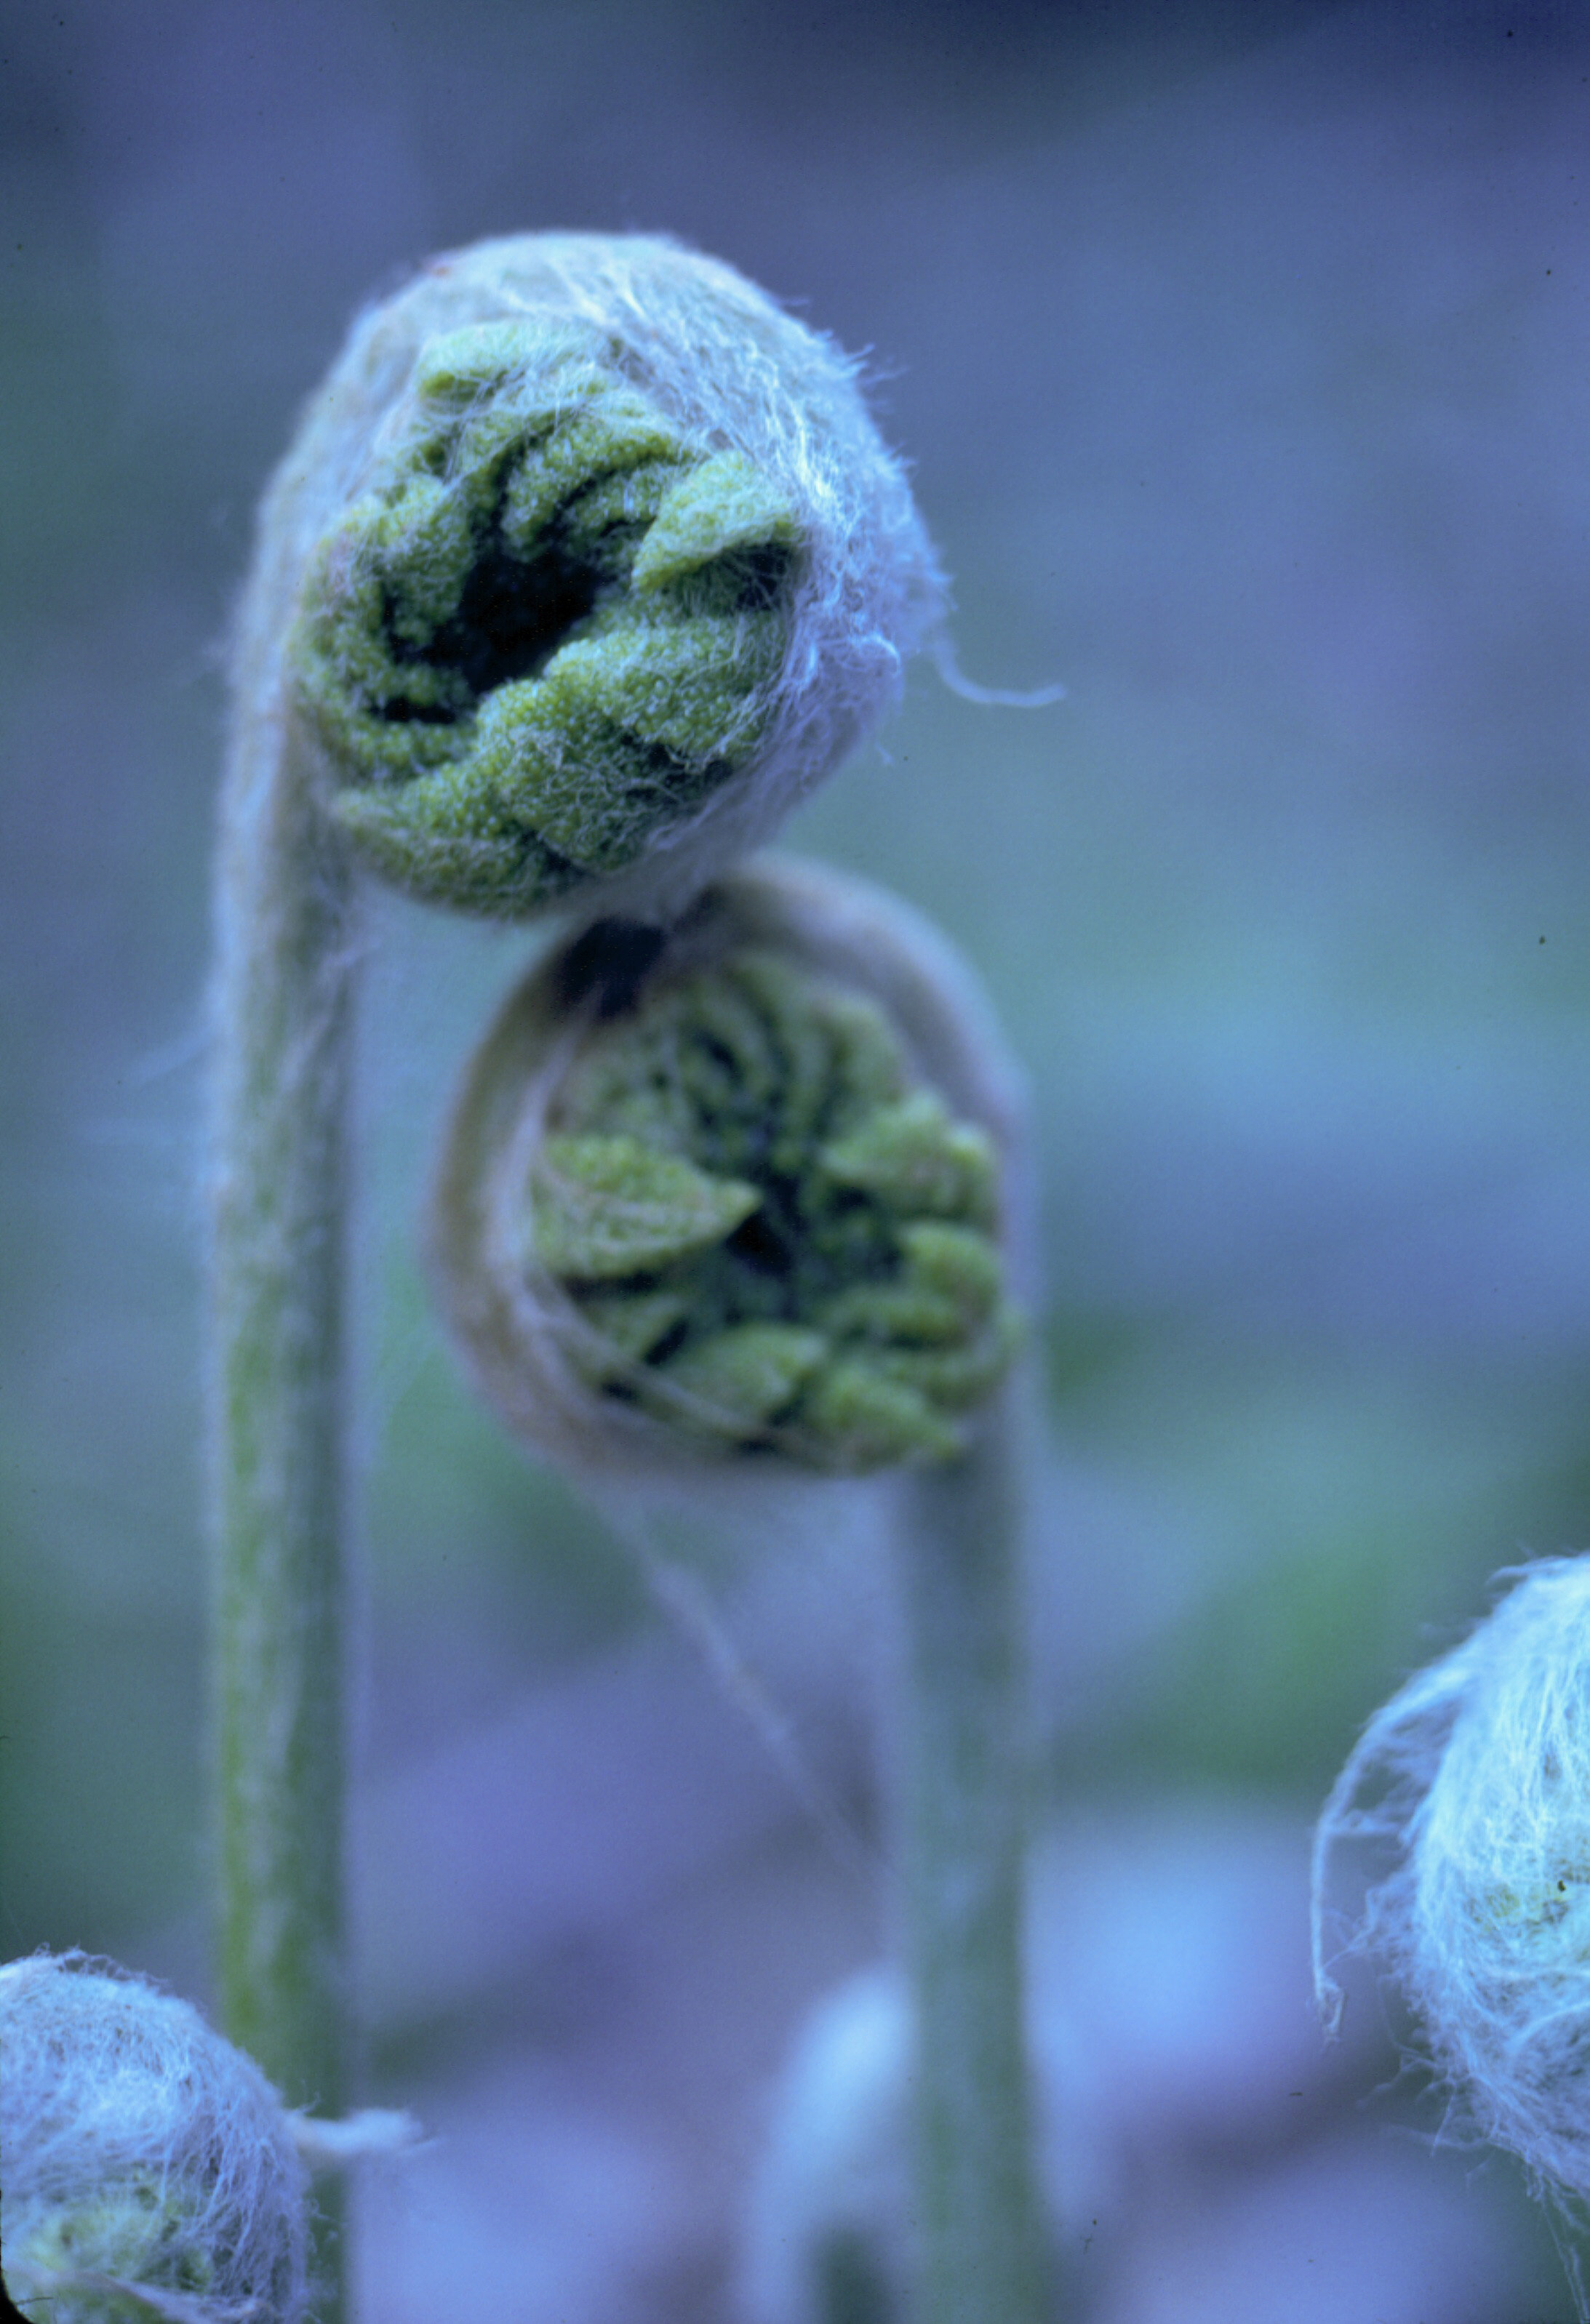 Fiddleheads Couple (date unknown)